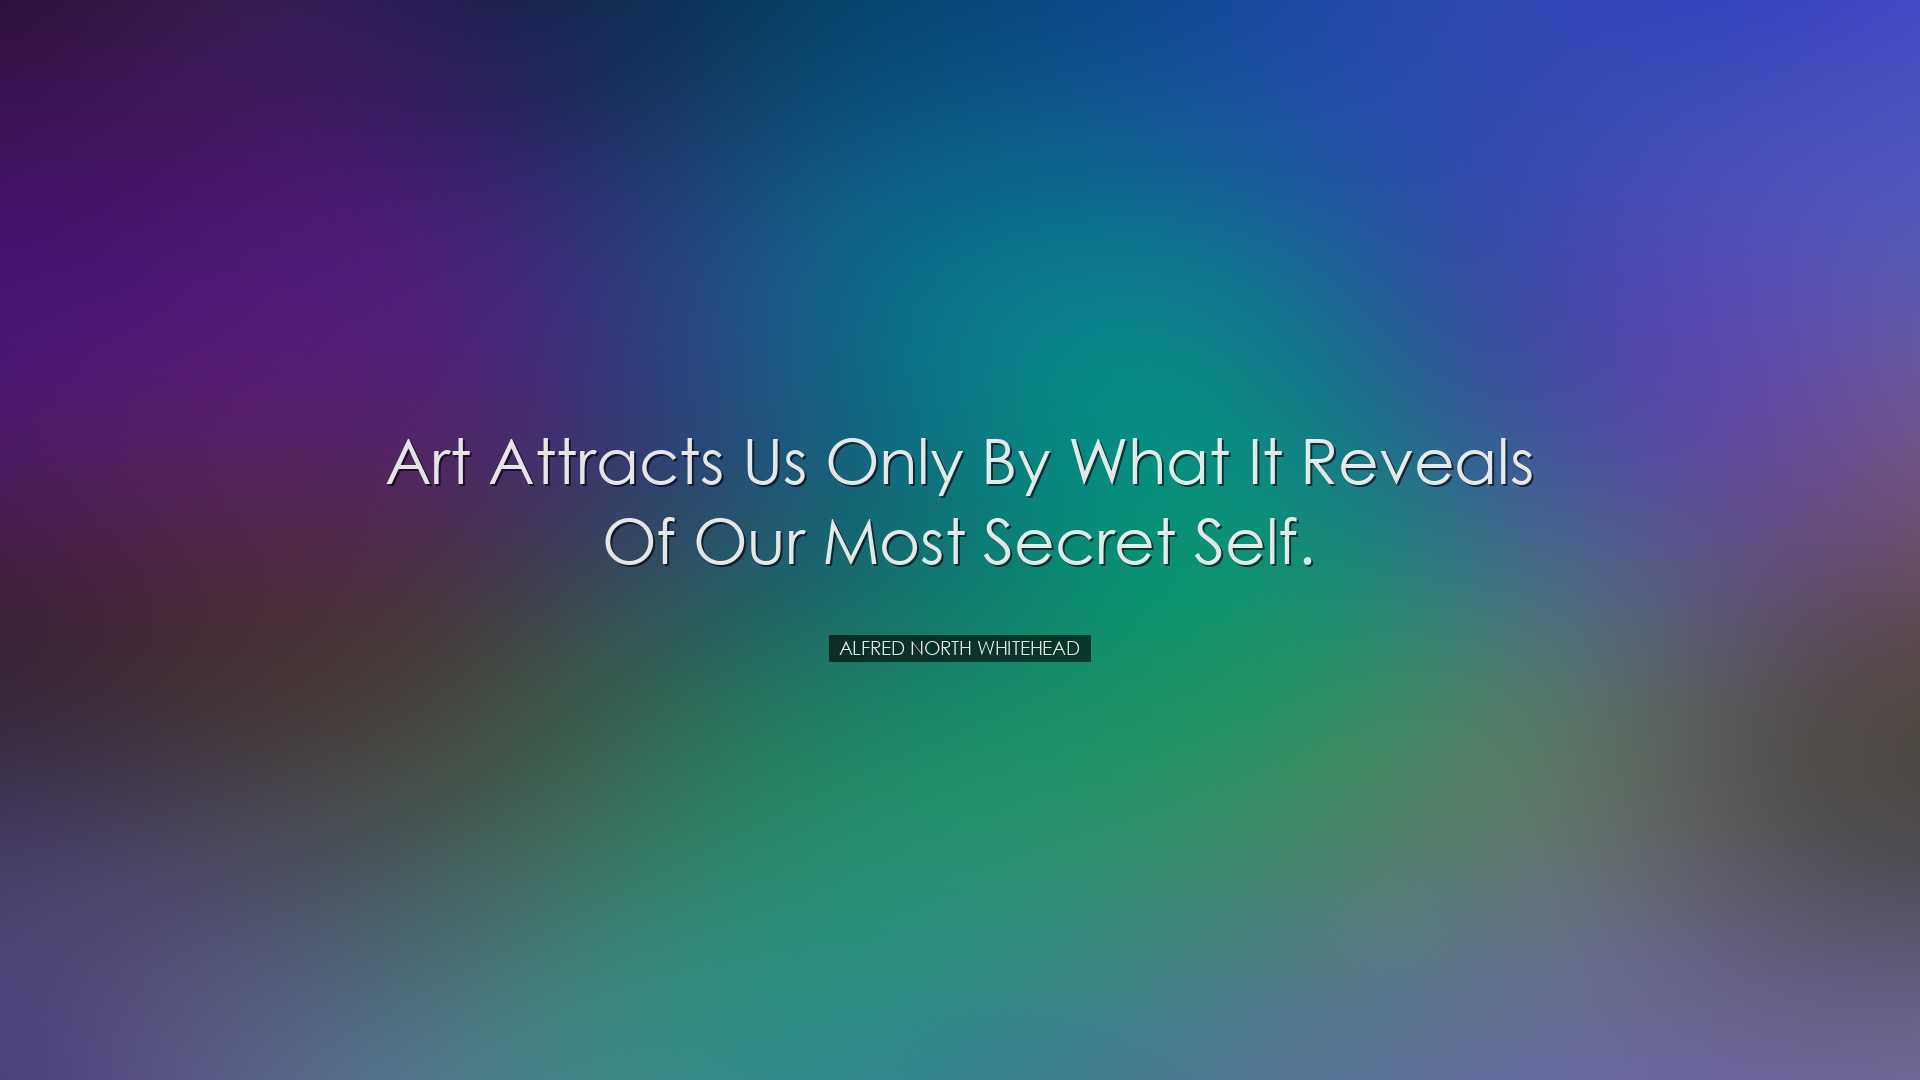 Art attracts us only by what it reveals of our most secret self. -